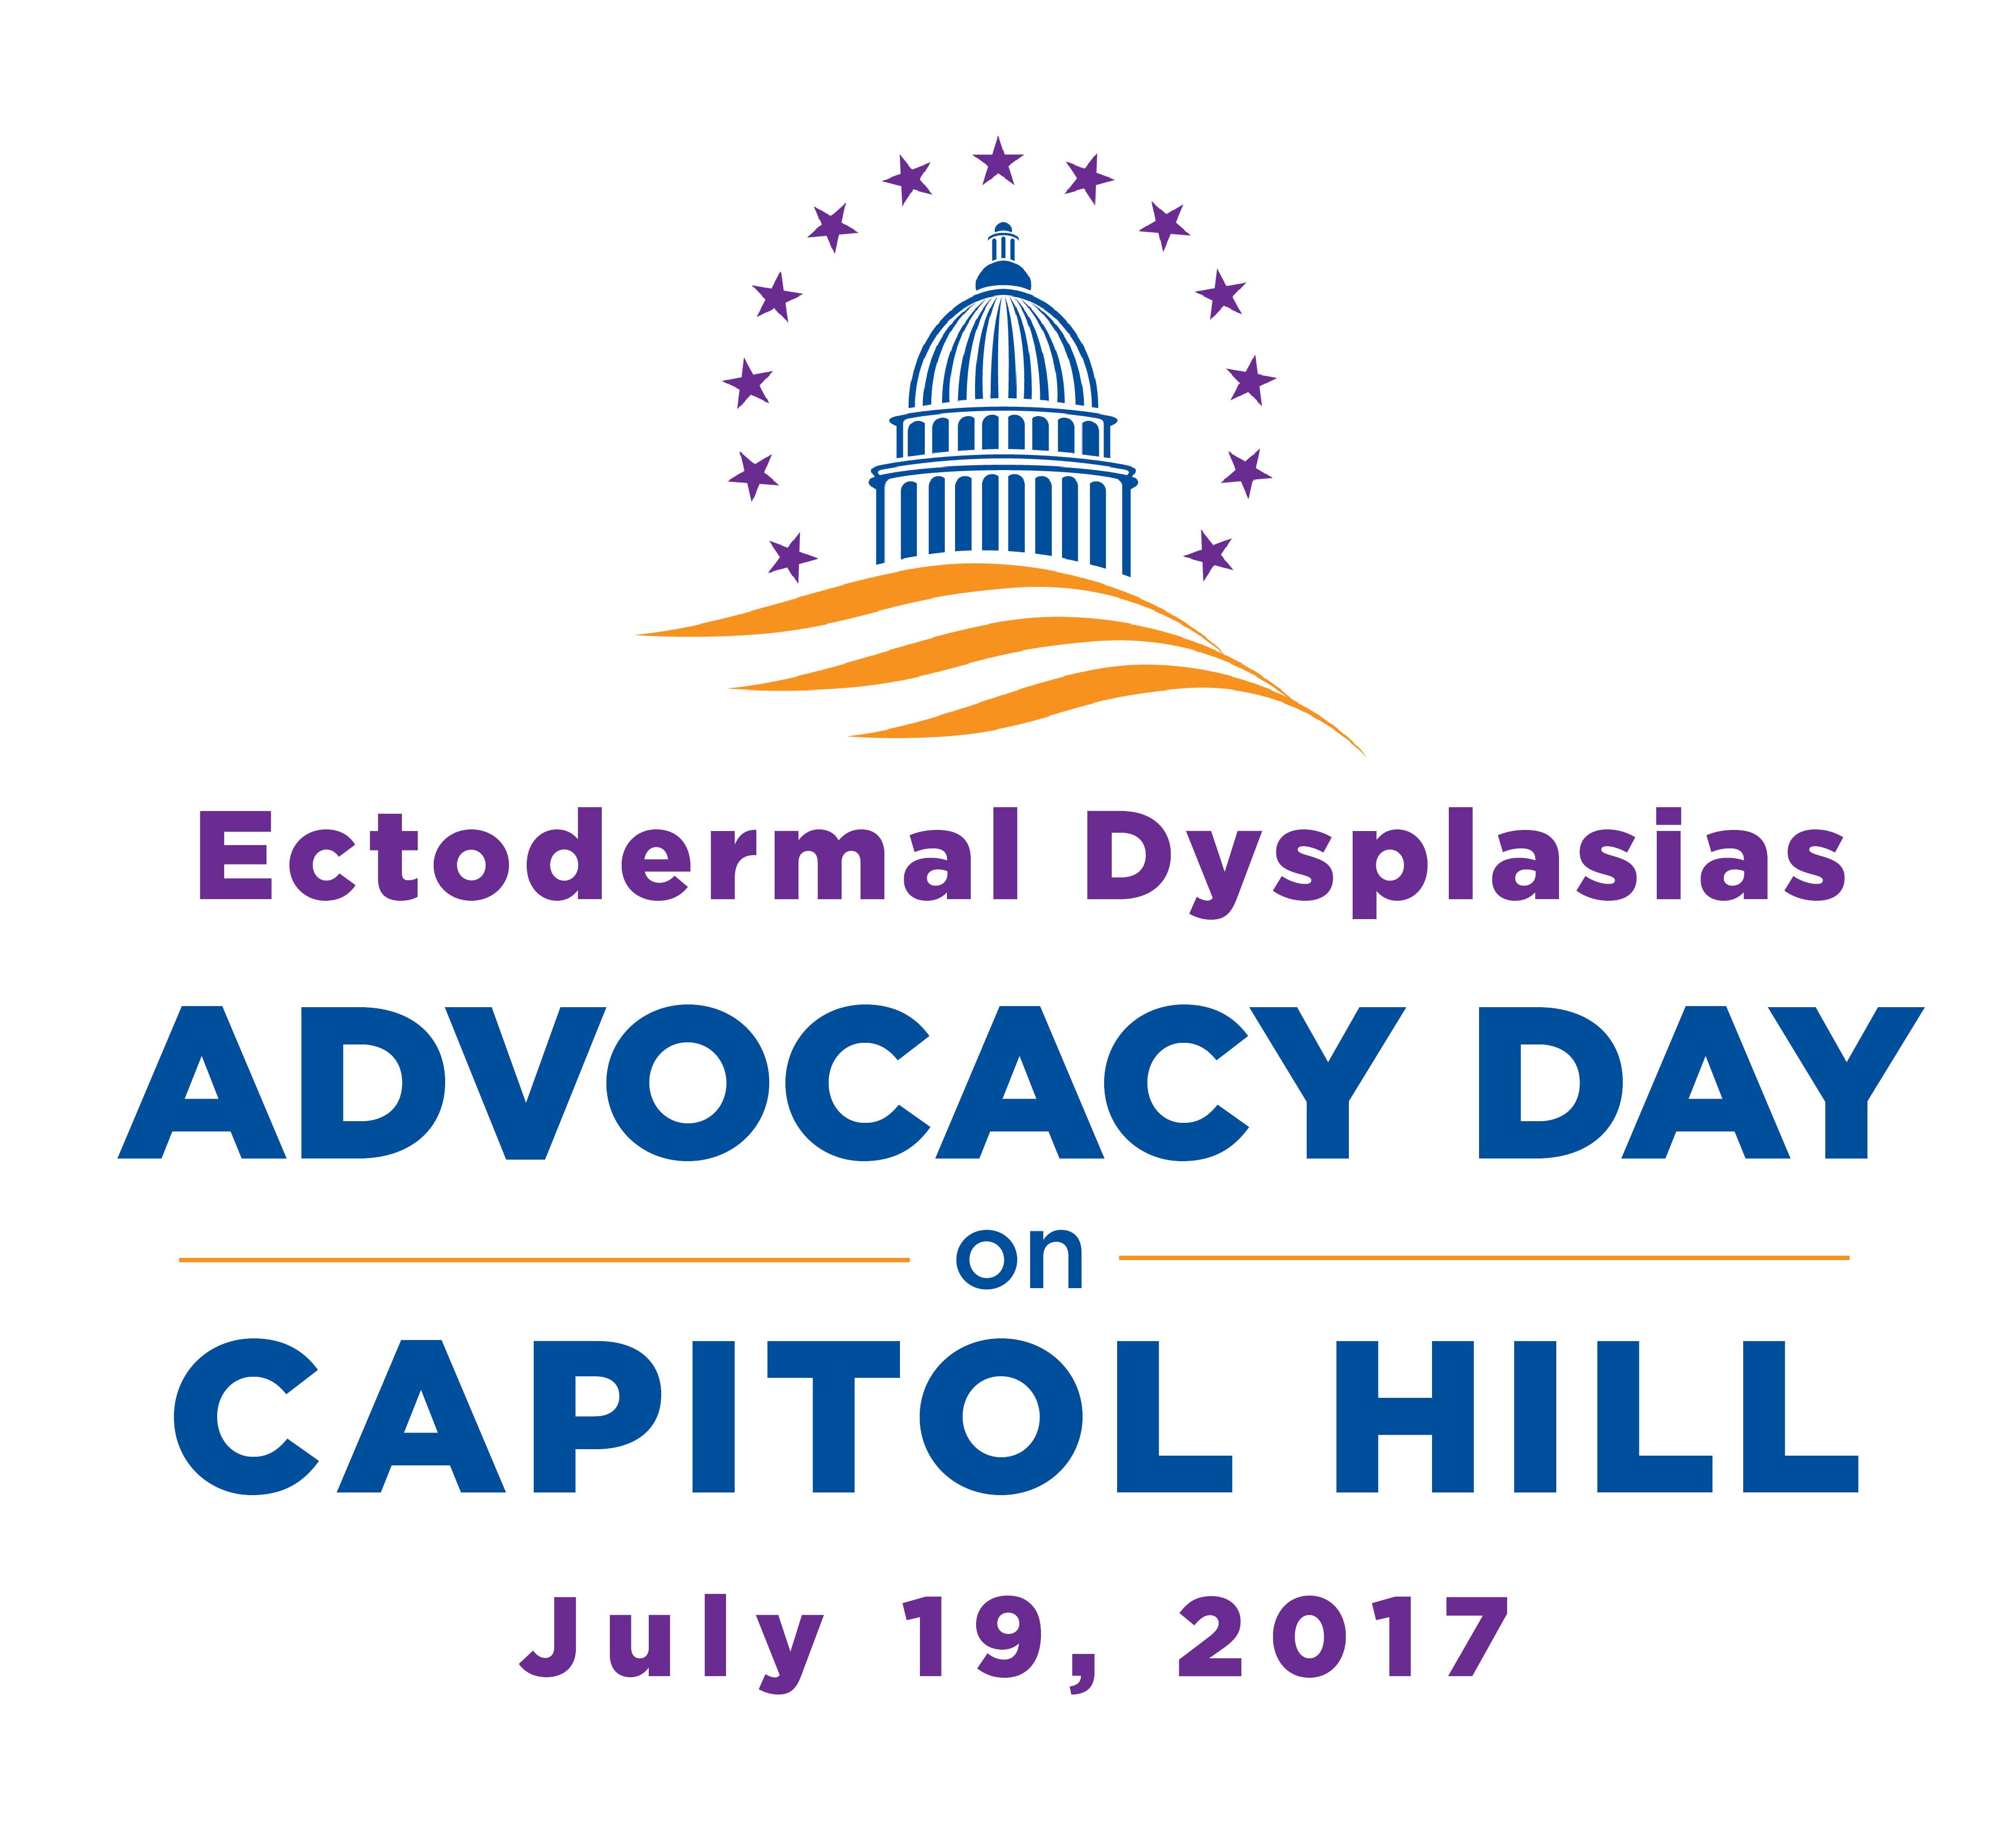 Advocacy Day on Capitol Hill NFED